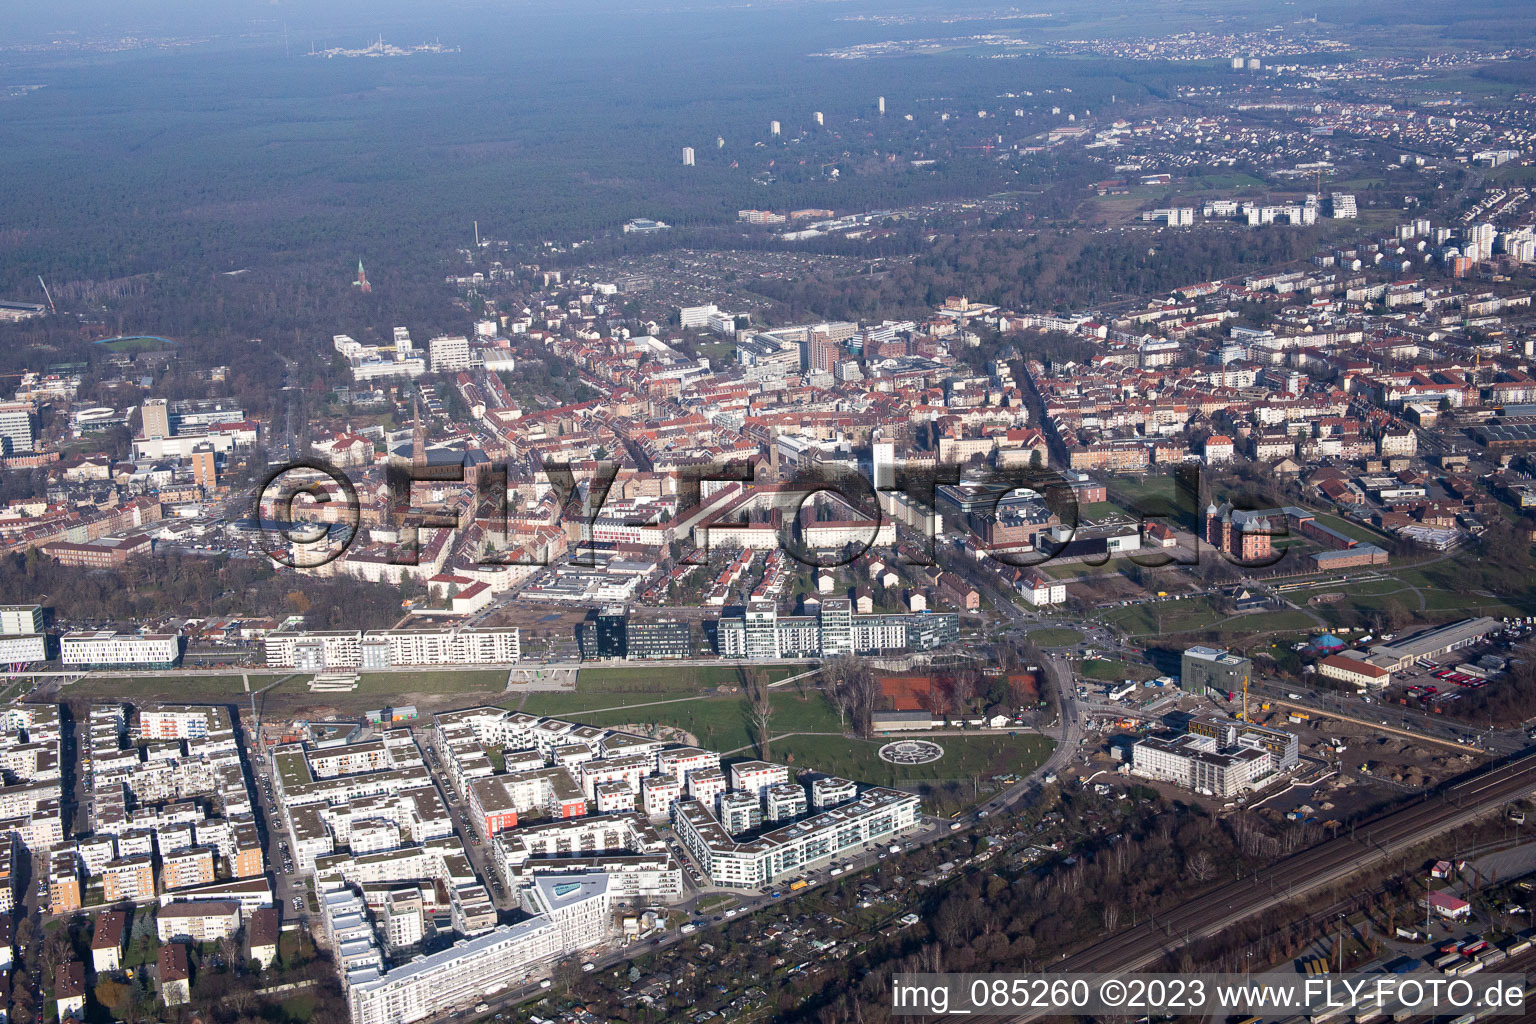 District Rintheim in Karlsruhe in the state Baden-Wuerttemberg, Germany from the plane